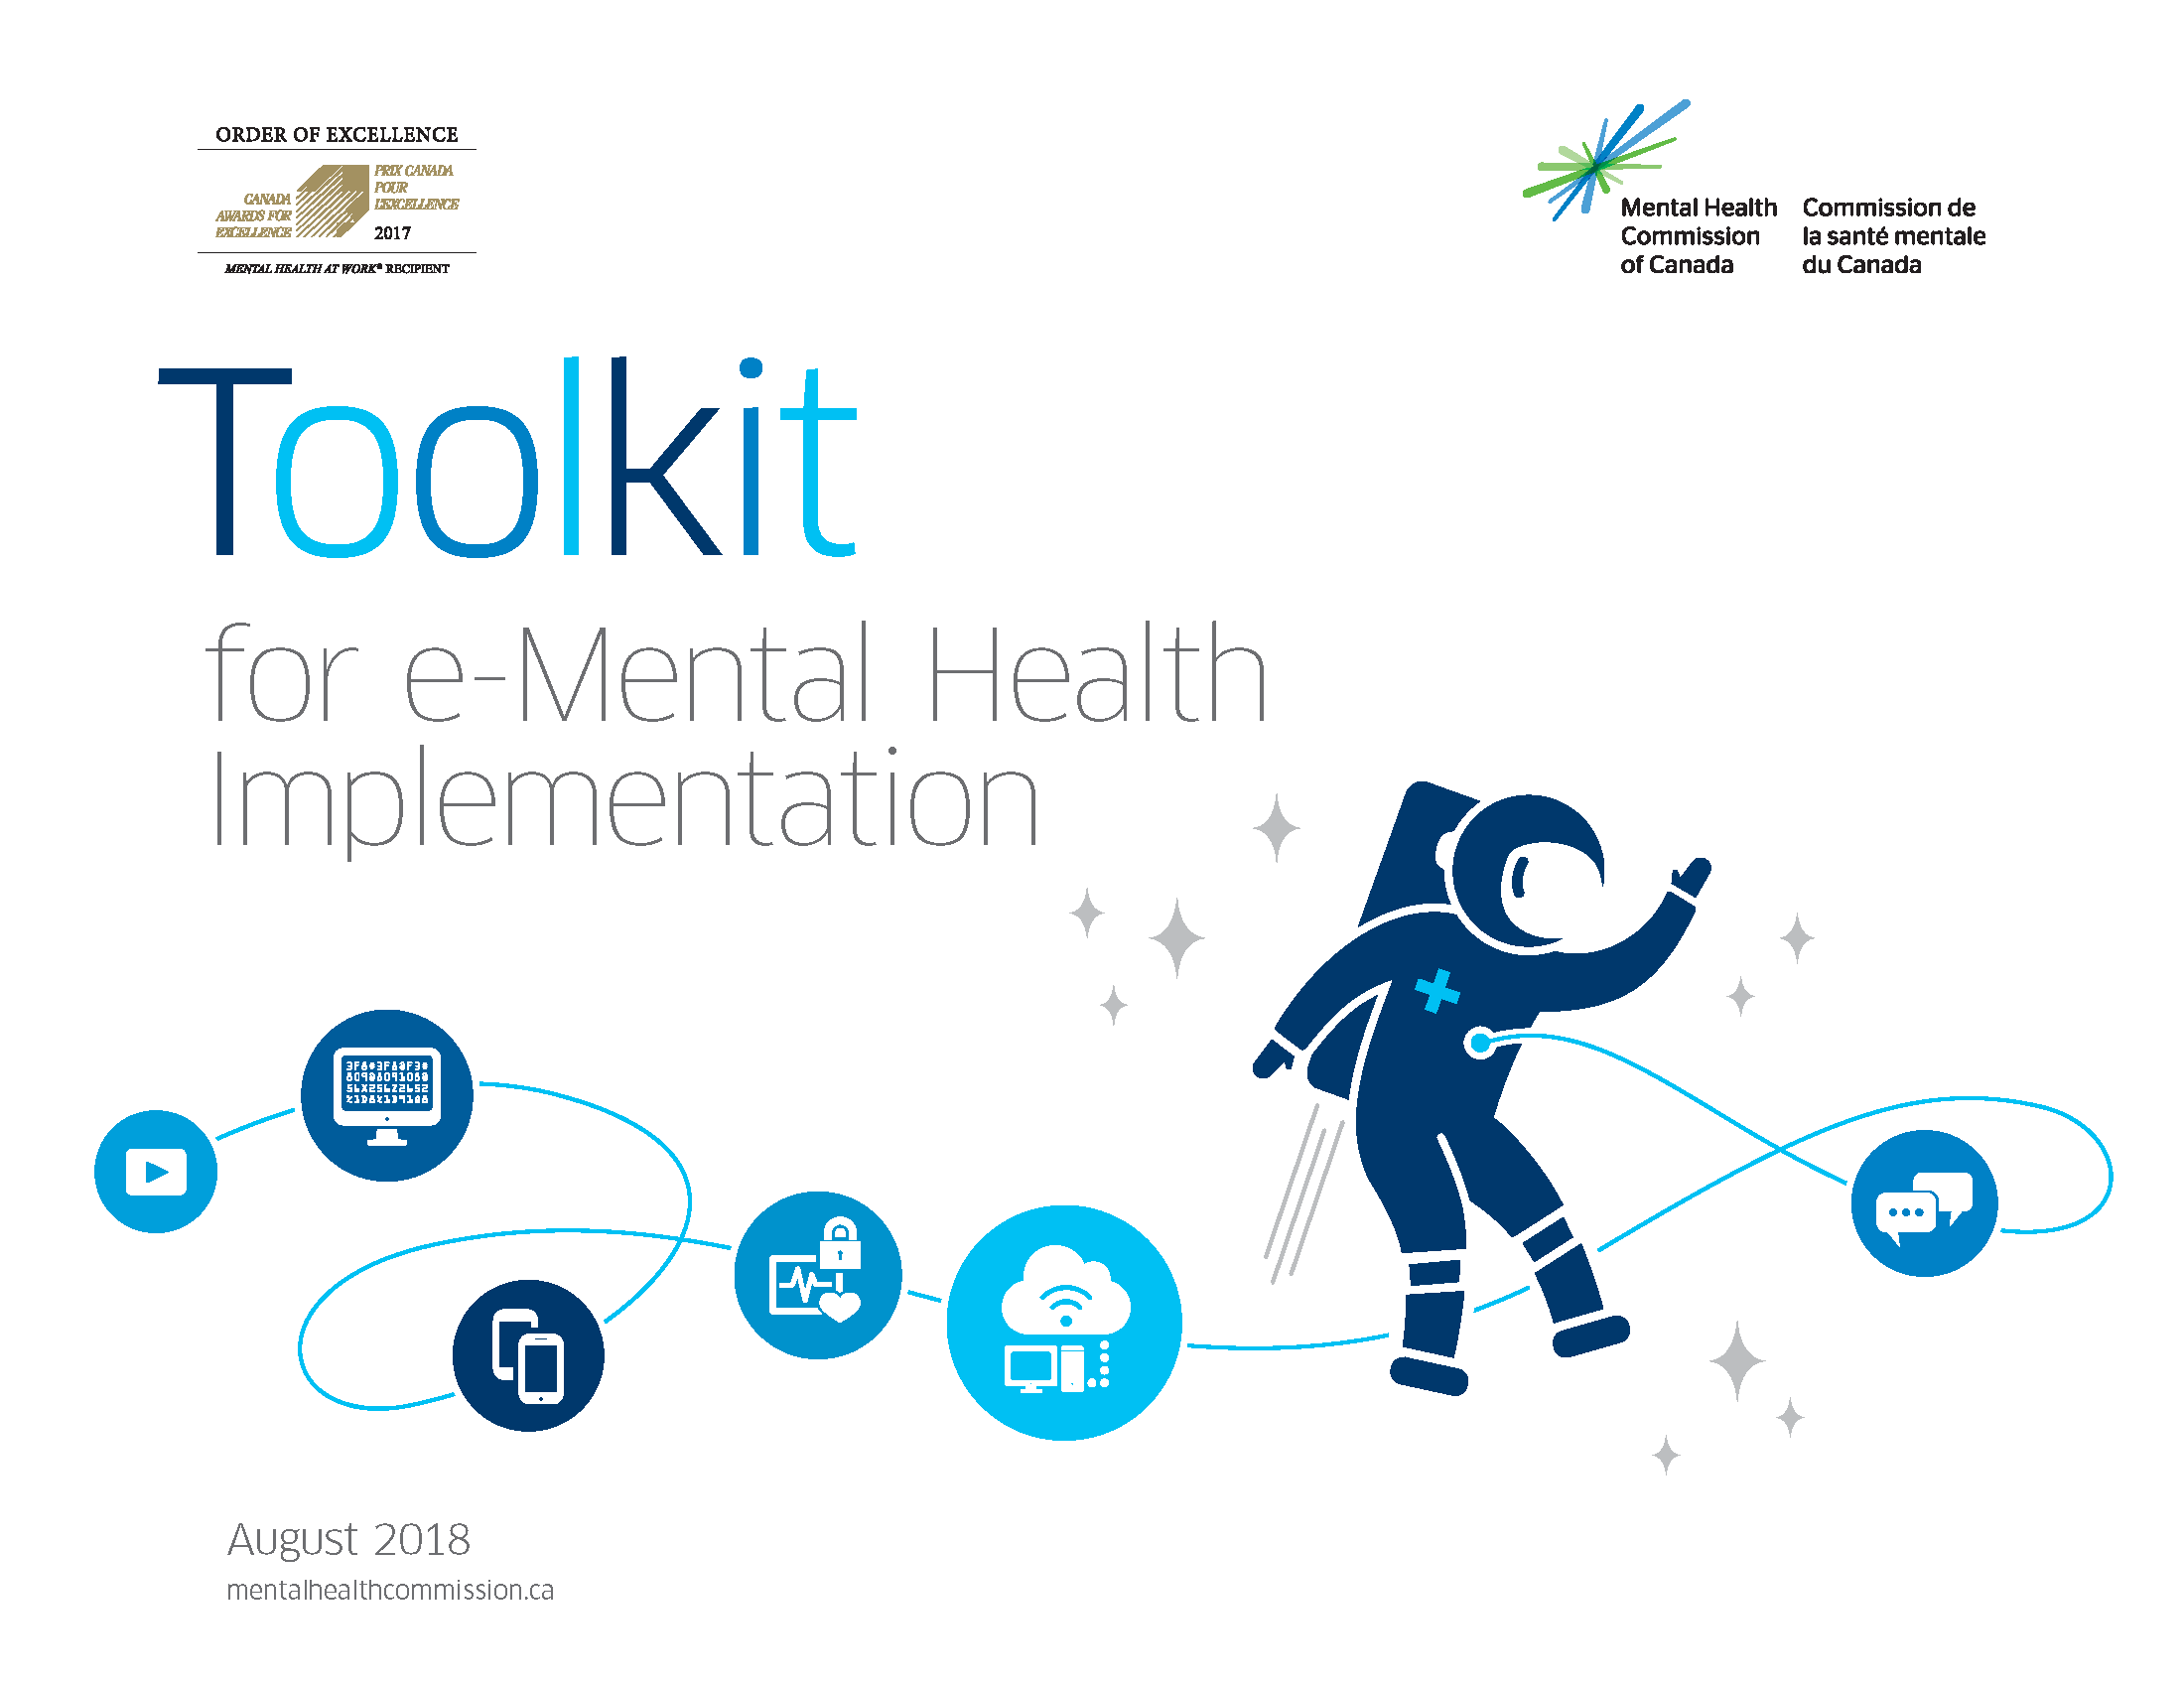 On a white background, we see the Order of Excellence for Mental Health in the Workplace in the top left corner and the logo of the Mental Health Commission of Canada, a spark made up of green and blue lines in the top right corner. Beneath the logos, we read the title of the document in varying shades of blue, "Toolkit for e-Mental Health Implementation." Underneath the title is a dark blue astronaut zooming through the stars. There is a wire connected to the front of the astronaut's suit. Along the wire are different icons. From right to left: - two white speech bubbles in a medium blue circle - a white desktop computer connecting to the cloud in a light blue circle - a white pulse monitor with a lock, indicating the security of health information, in a medium blue circle - two white smartphones in a dark blue circle - a white computer monitor with code on the screen in a medium blue background - a white play button (a triangle pointed to the right inside of a rectangle) in a light blue circle